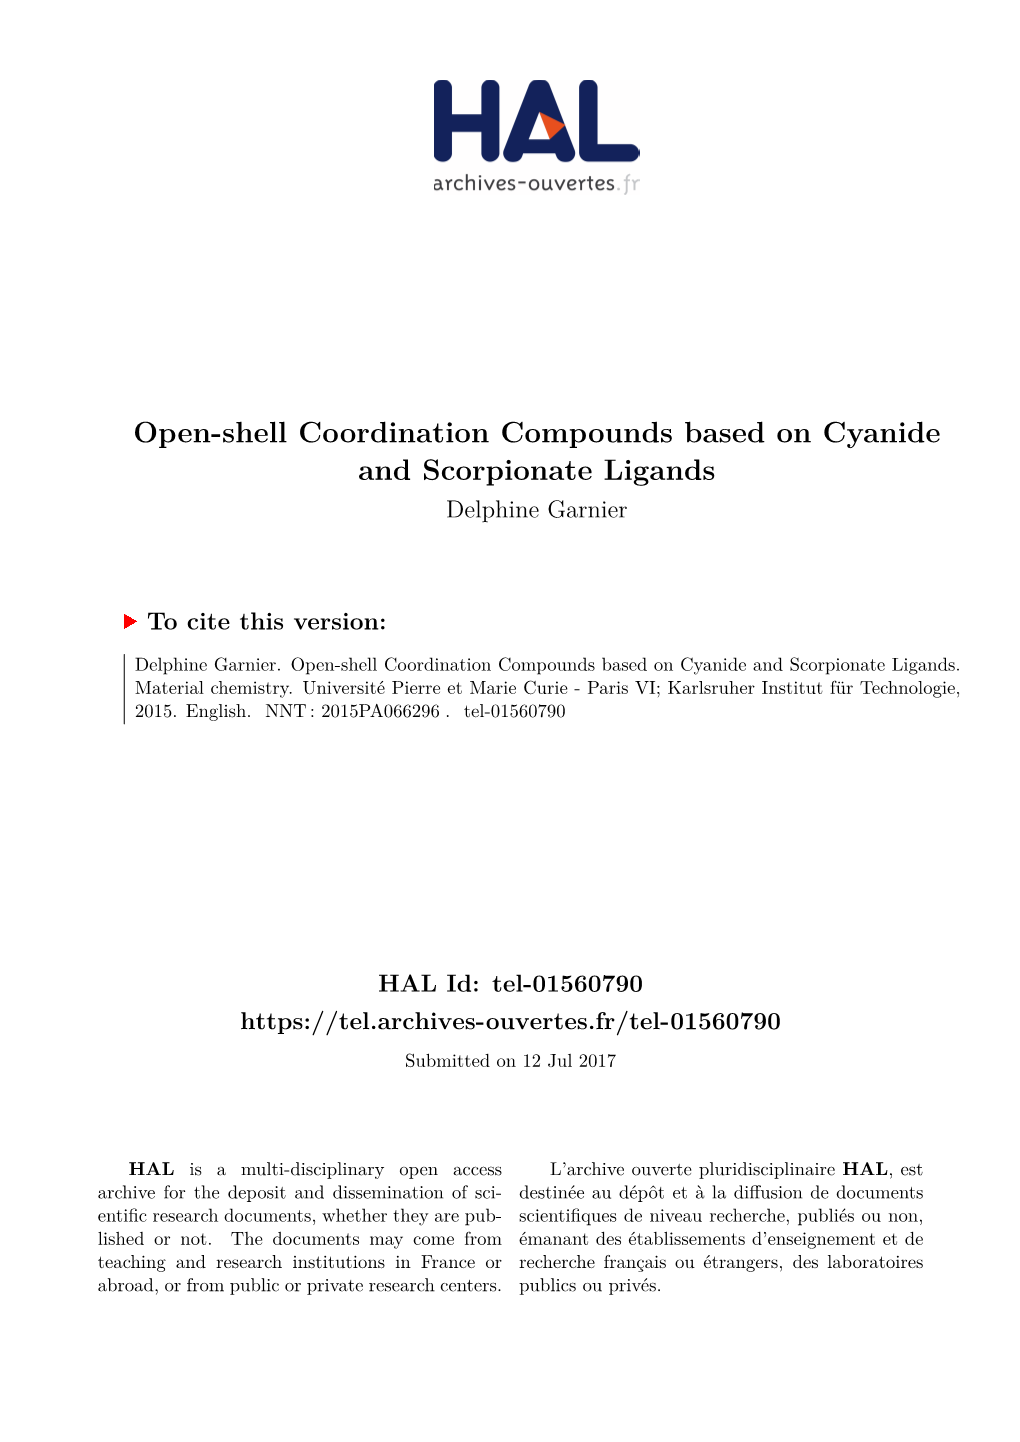 Open-Shell Coordination Compounds Based on Cyanide and Scorpionate Ligands Delphine Garnier